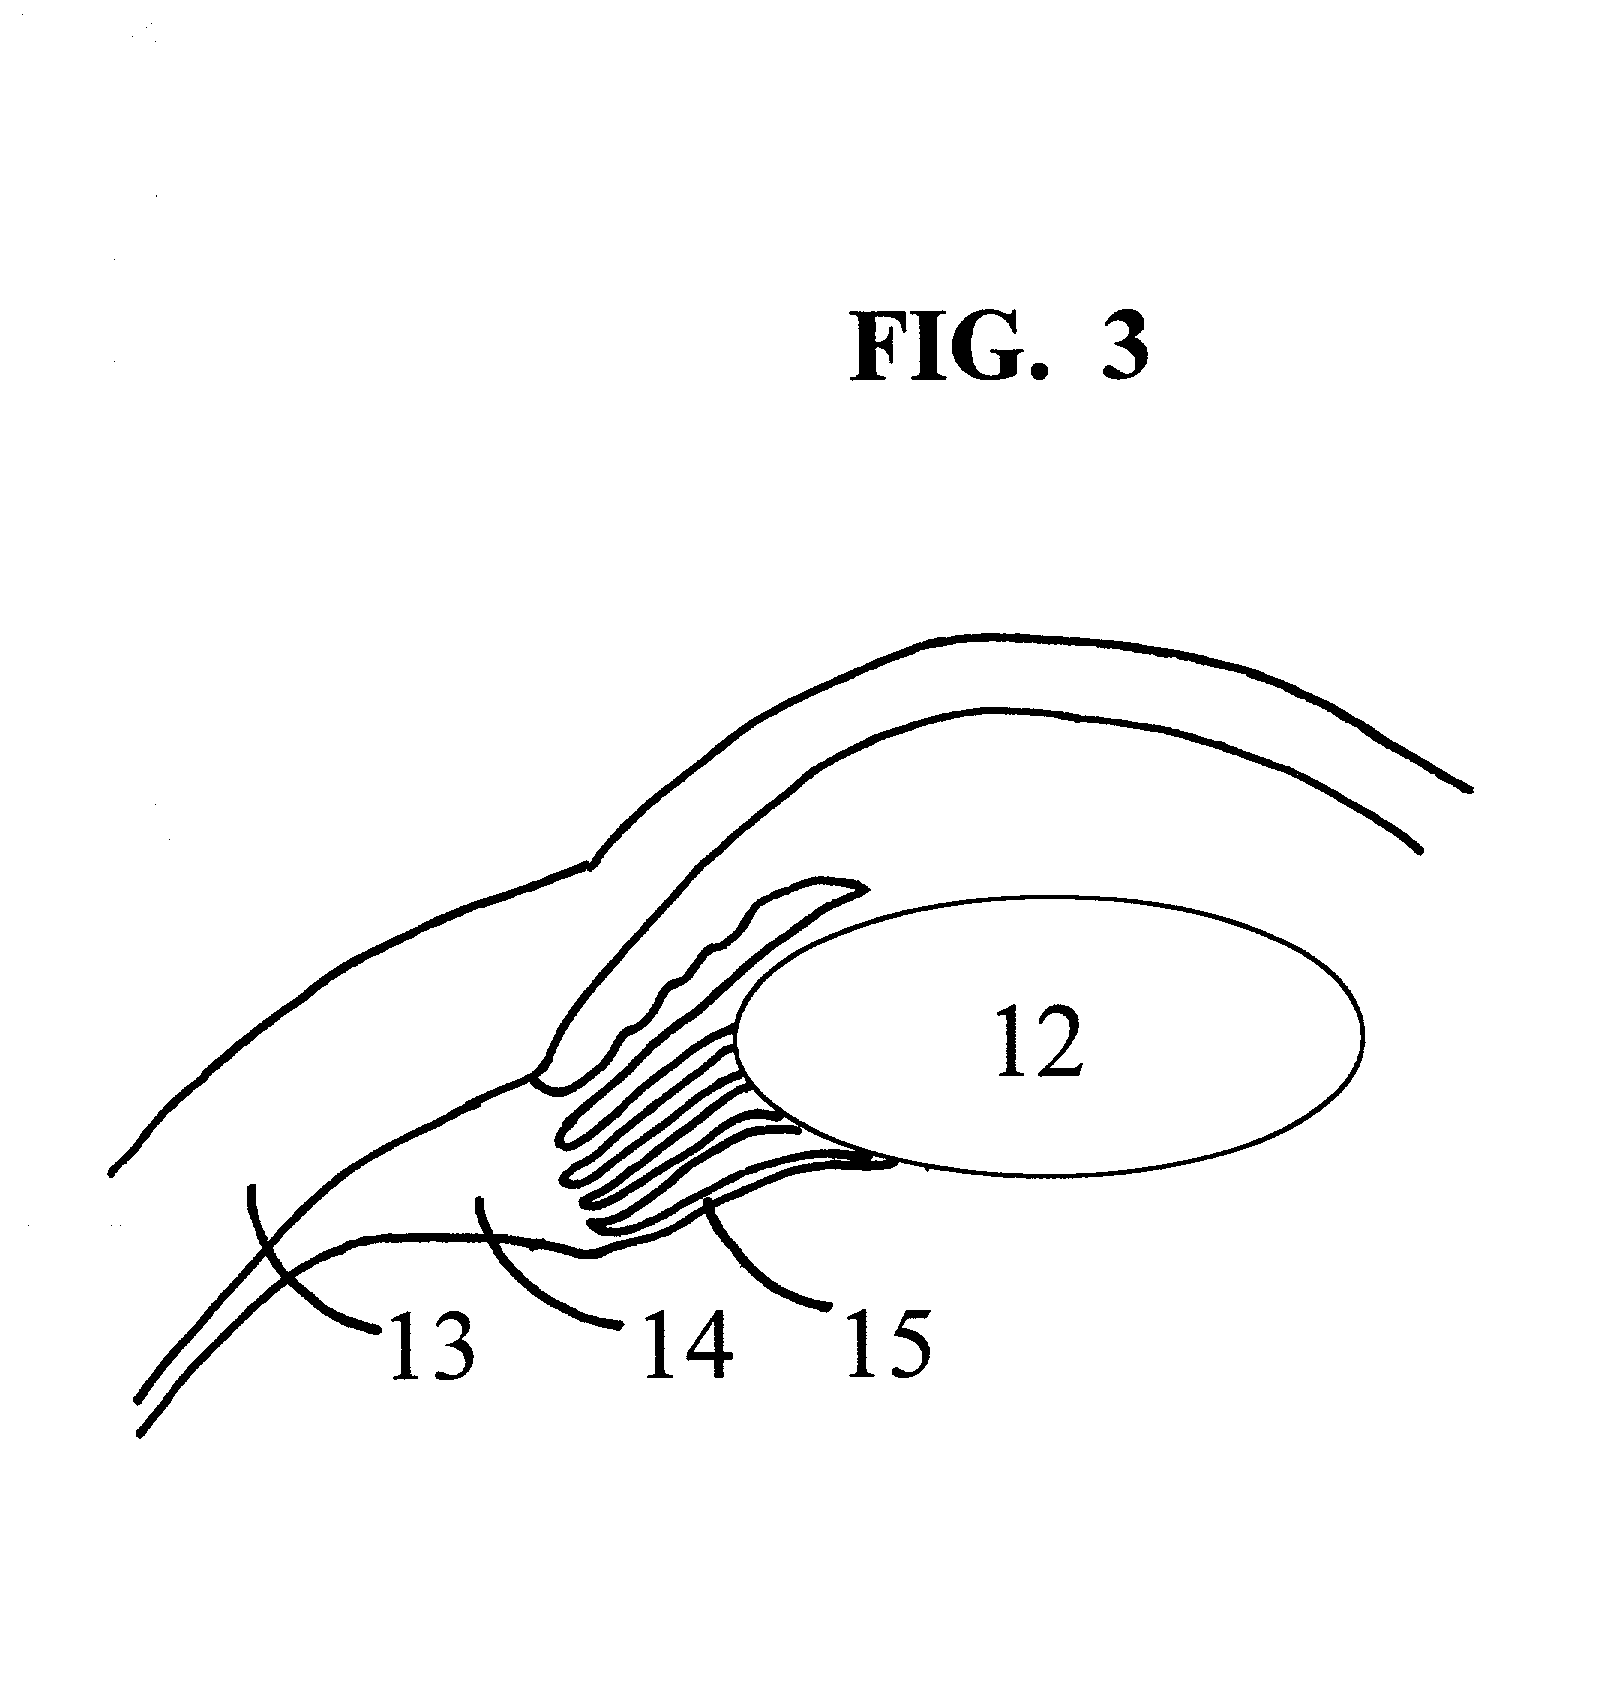 Methods and apparatus for presbyopia treatment using a scanning laser system